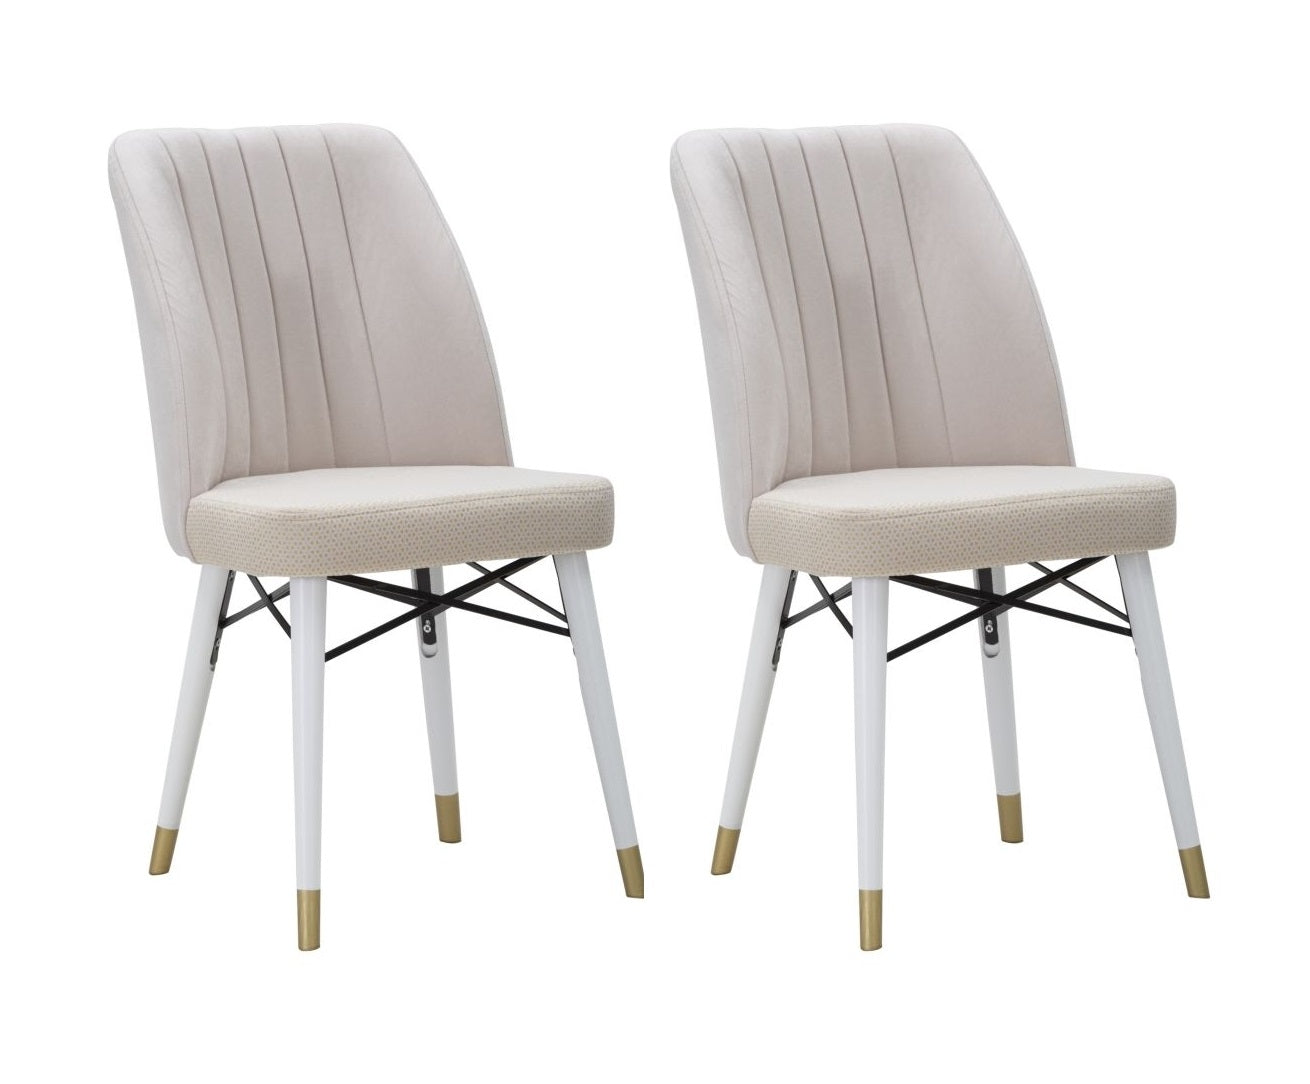 Buy Set of 2 chairs upholstered with fabric and wooden legs Bella Velvet Cream / White / Gold, L50xW49xH92.5 cm online, best price, free delivery